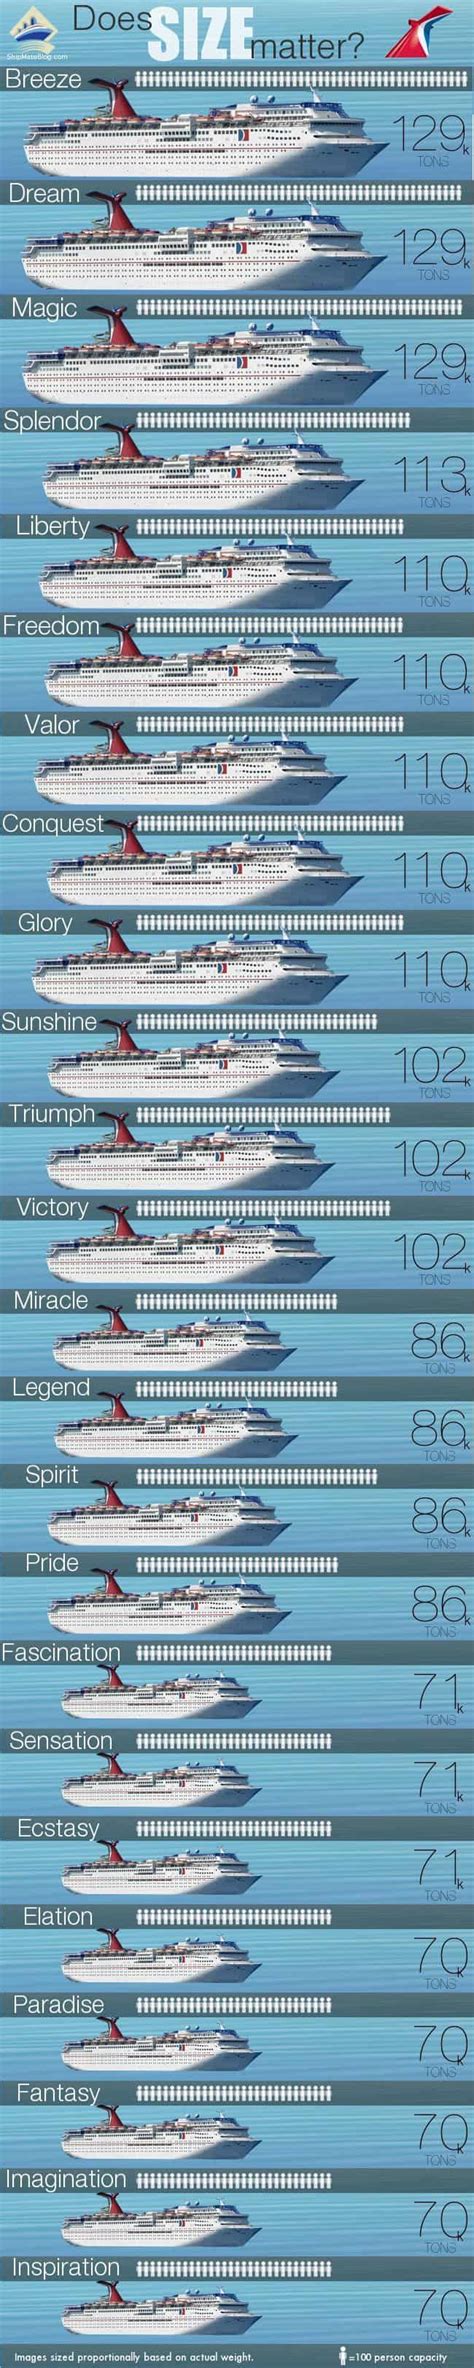 Carnival Cruise Ships Names And Sizes Cruise Everyday